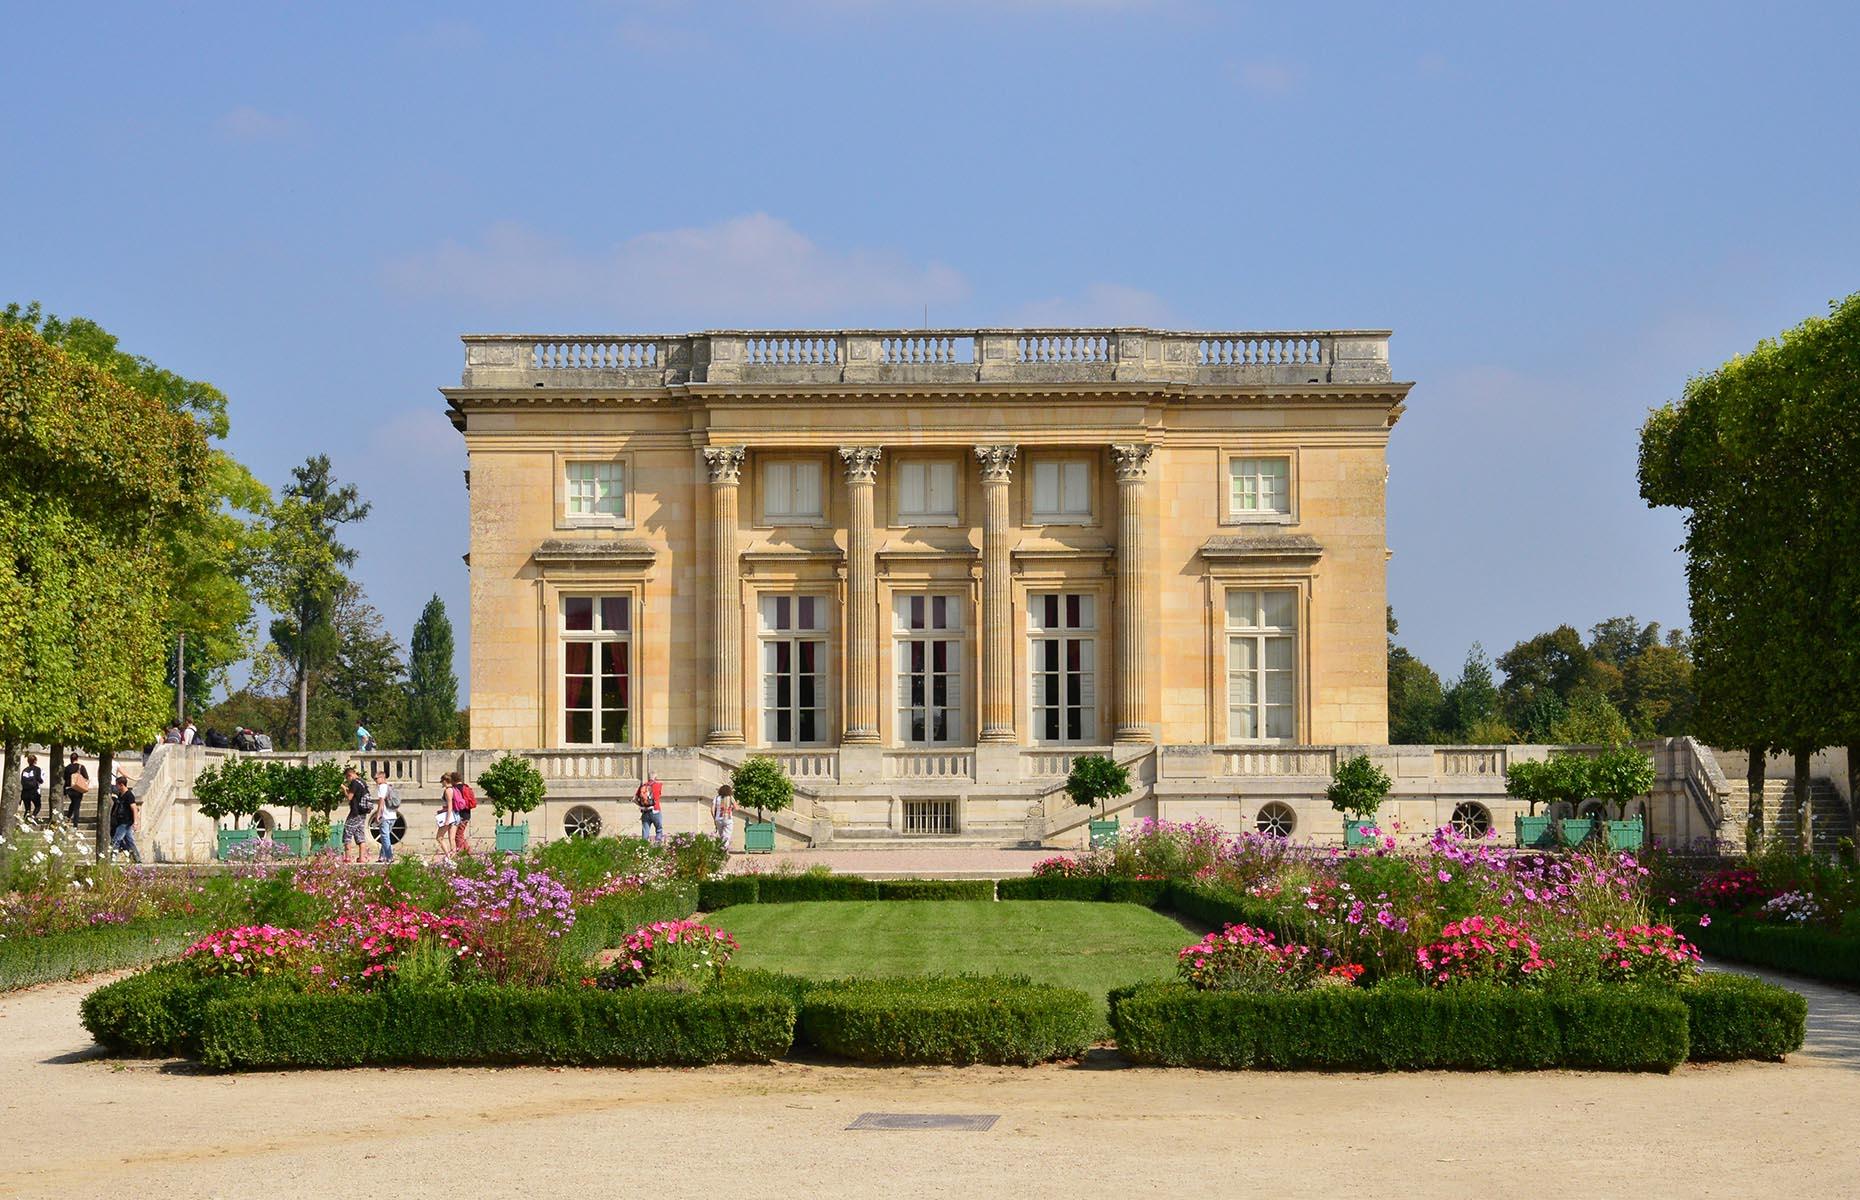 <p>As if the grandeur of one palace wasn't enough, Louis XVI gifted his wife a smaller one known as the Petit Trianon (pictured), situated on the grounds of Versailles. The château, which architect Ange-Jacques Gabriel had finished constructing in 1768, can still be visited today.</p>  <p>Marie Antoinette wasted no time redecorating the palace, later commissioning esteemed interior designers such as Jean and Jules Rousseau to design many of her private chambers.</p>